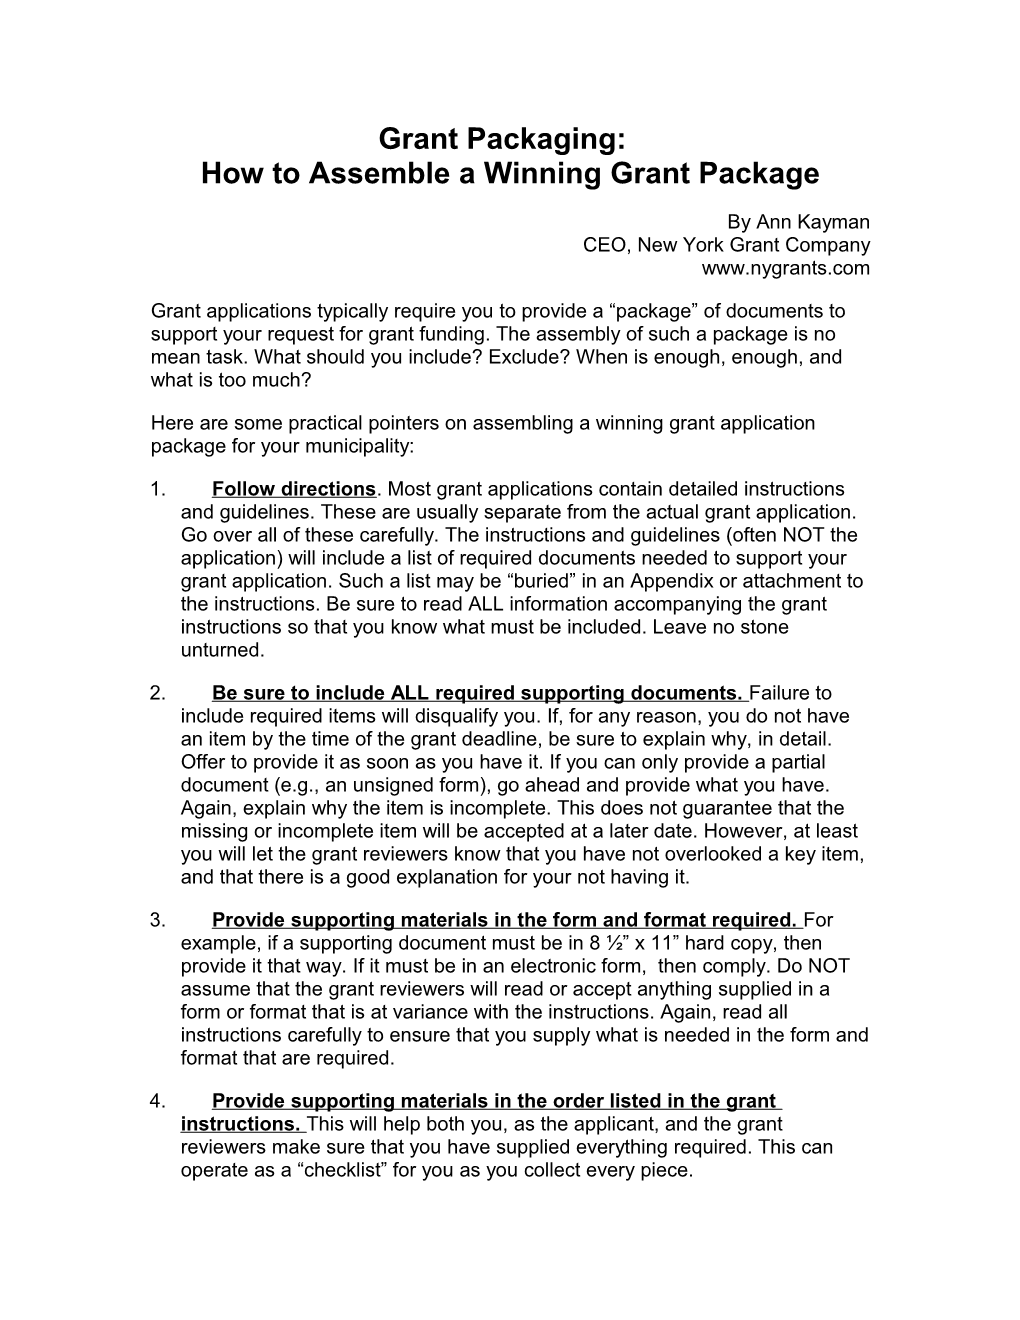 Grant Packaging: How to Assemble a Winning Grant Package